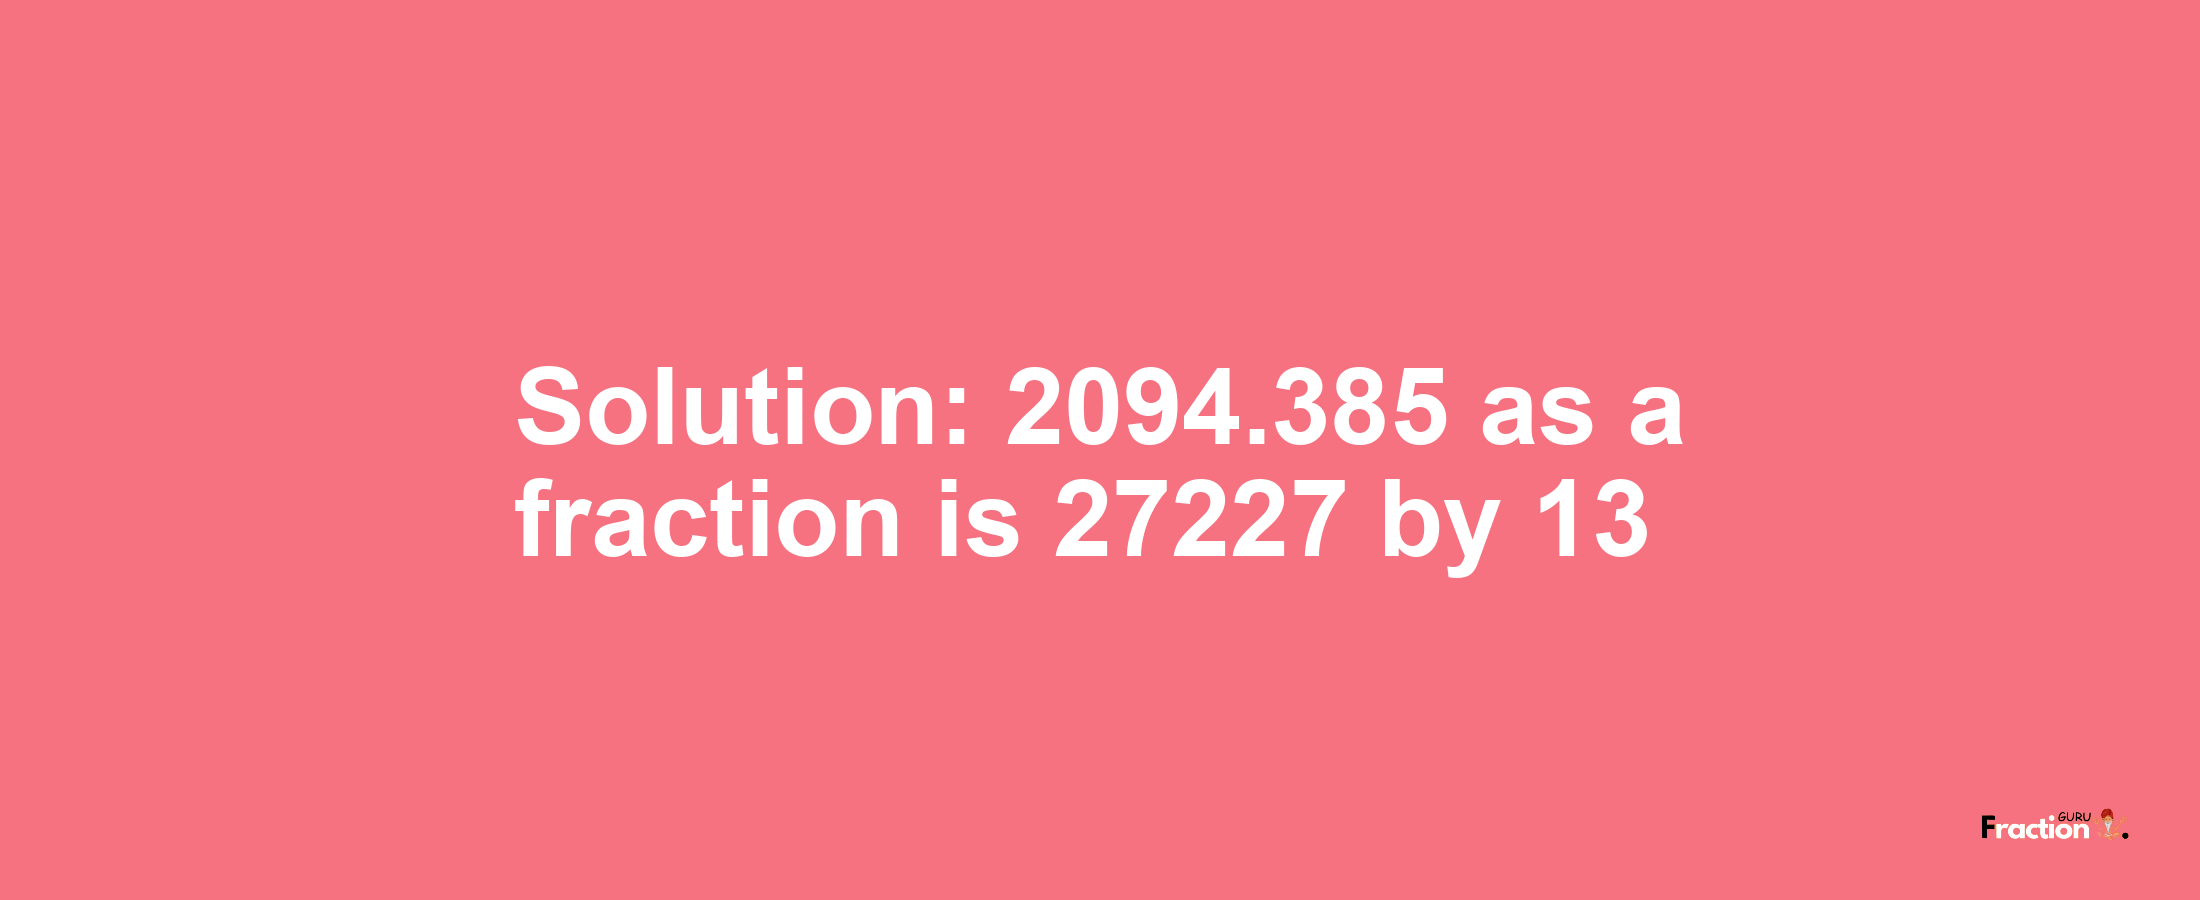 Solution:2094.385 as a fraction is 27227/13